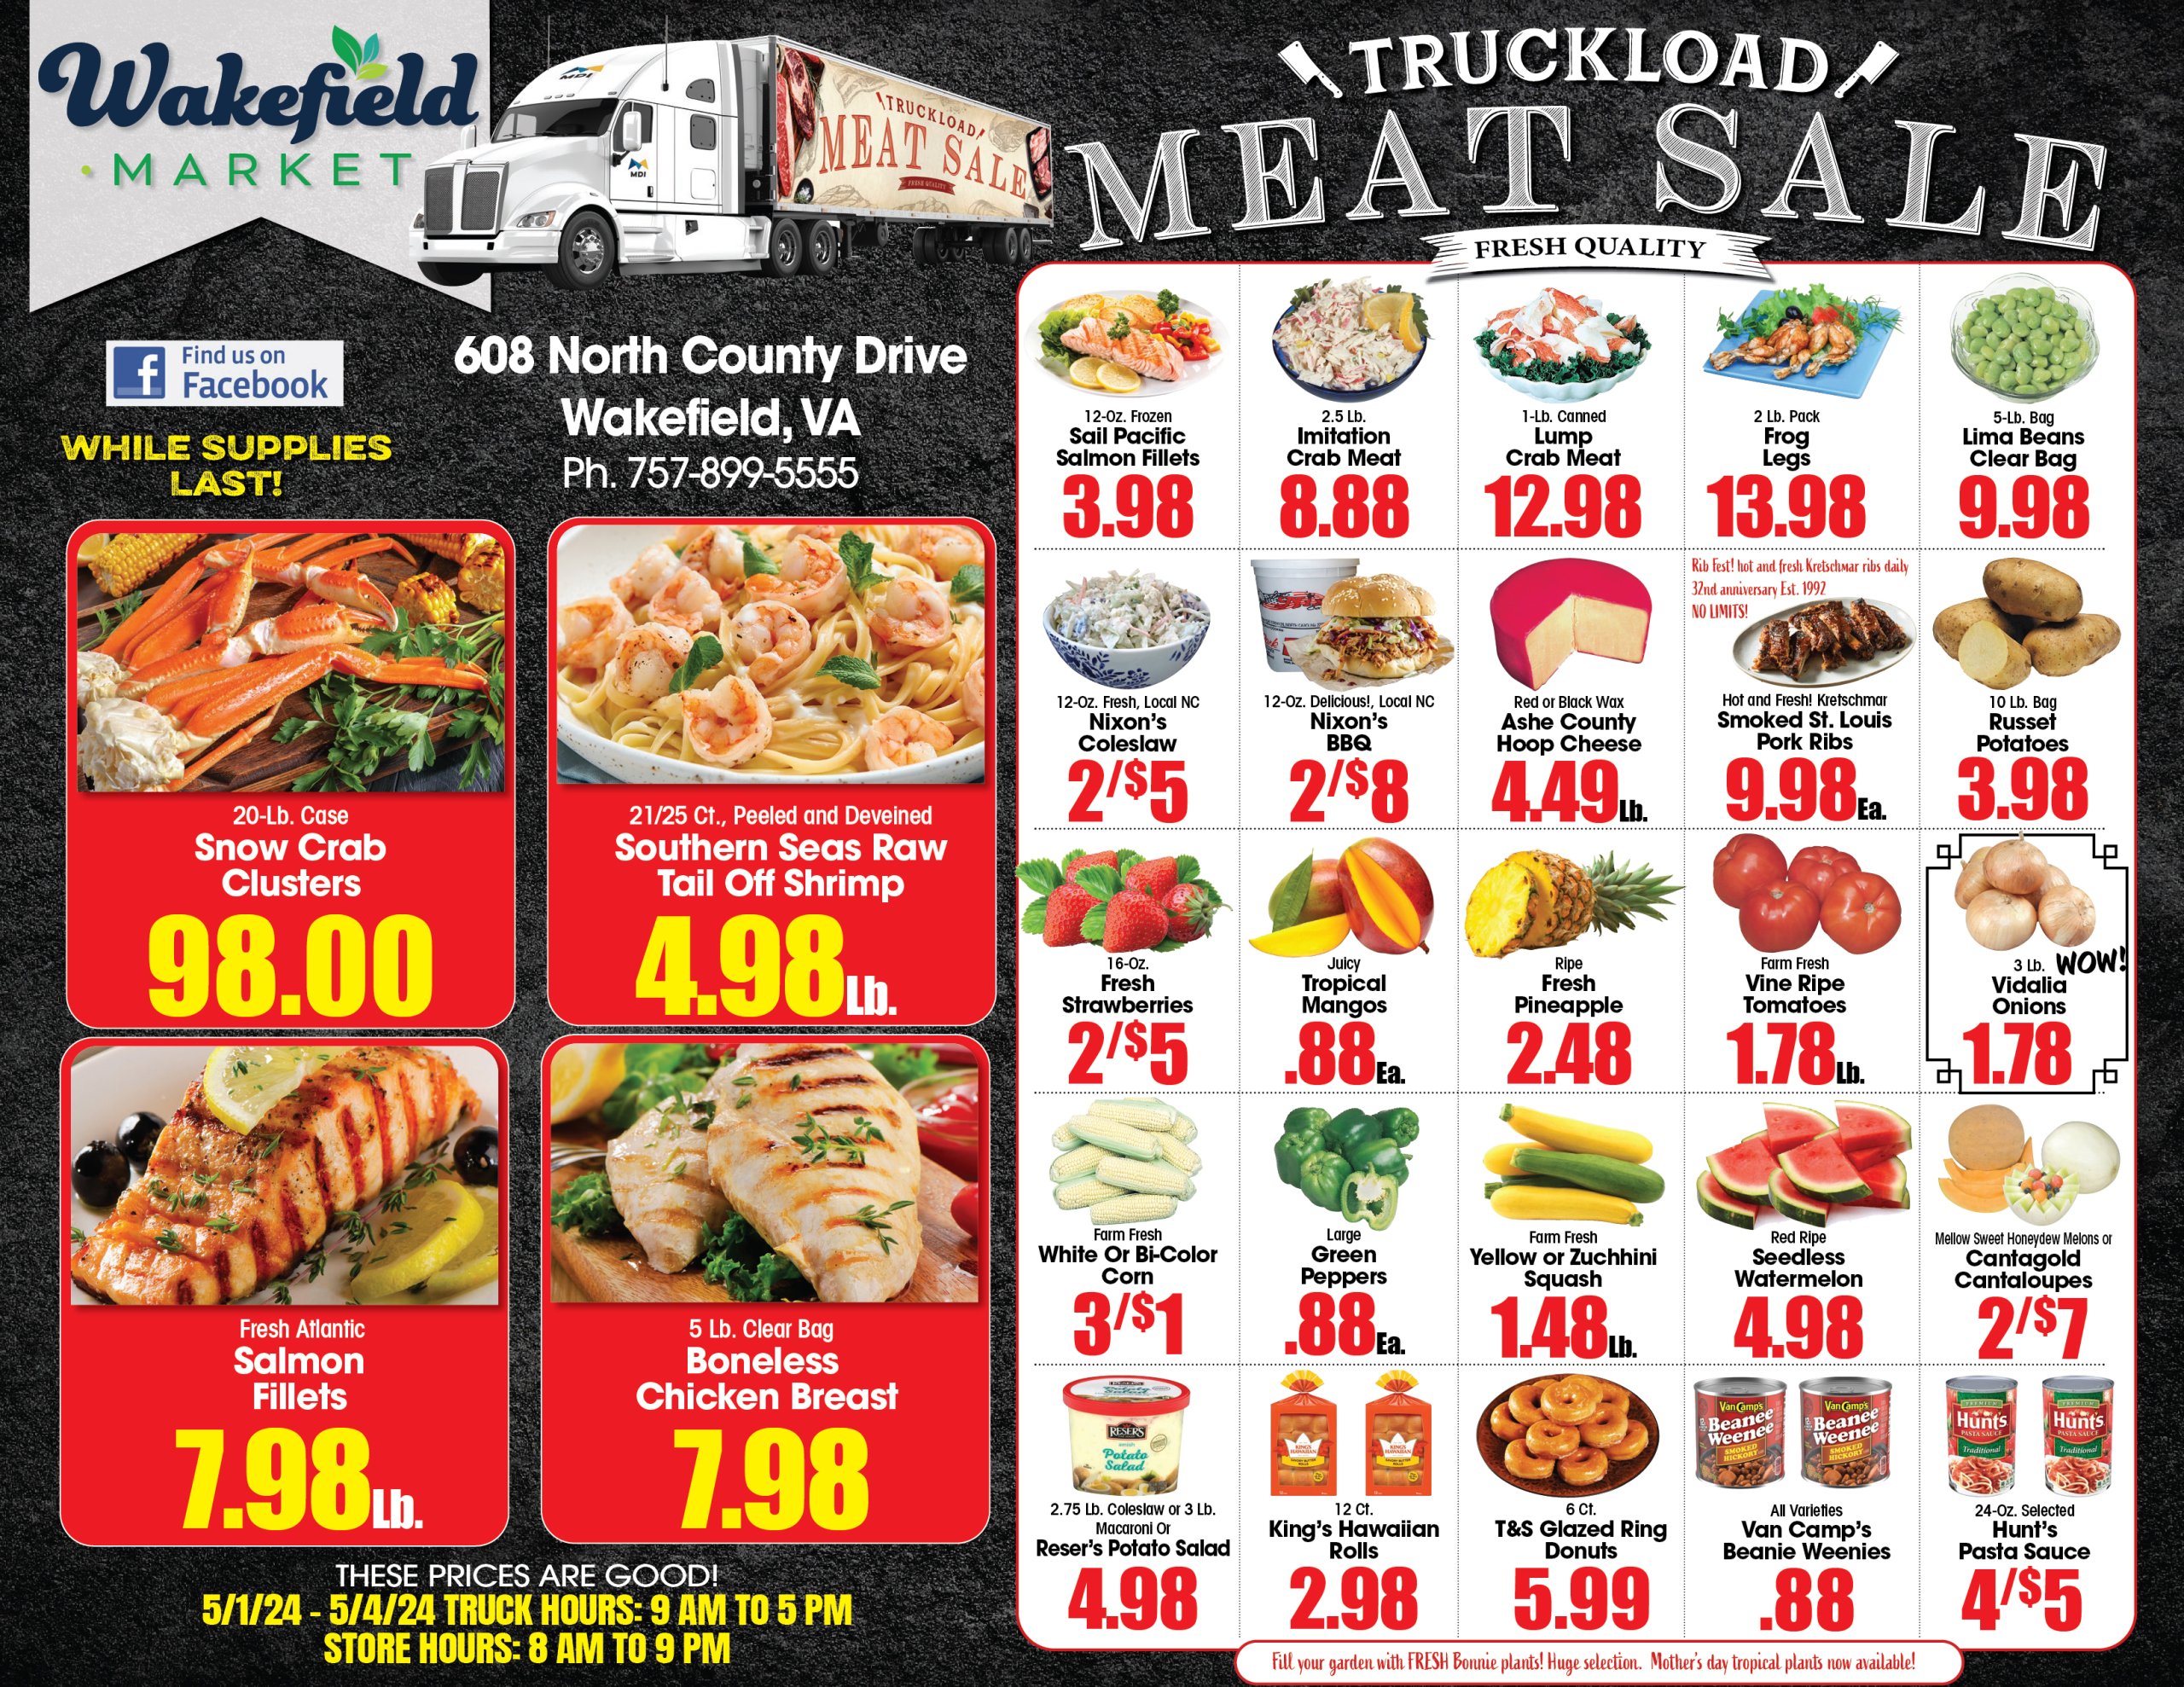 Truckload Meat Sale 01